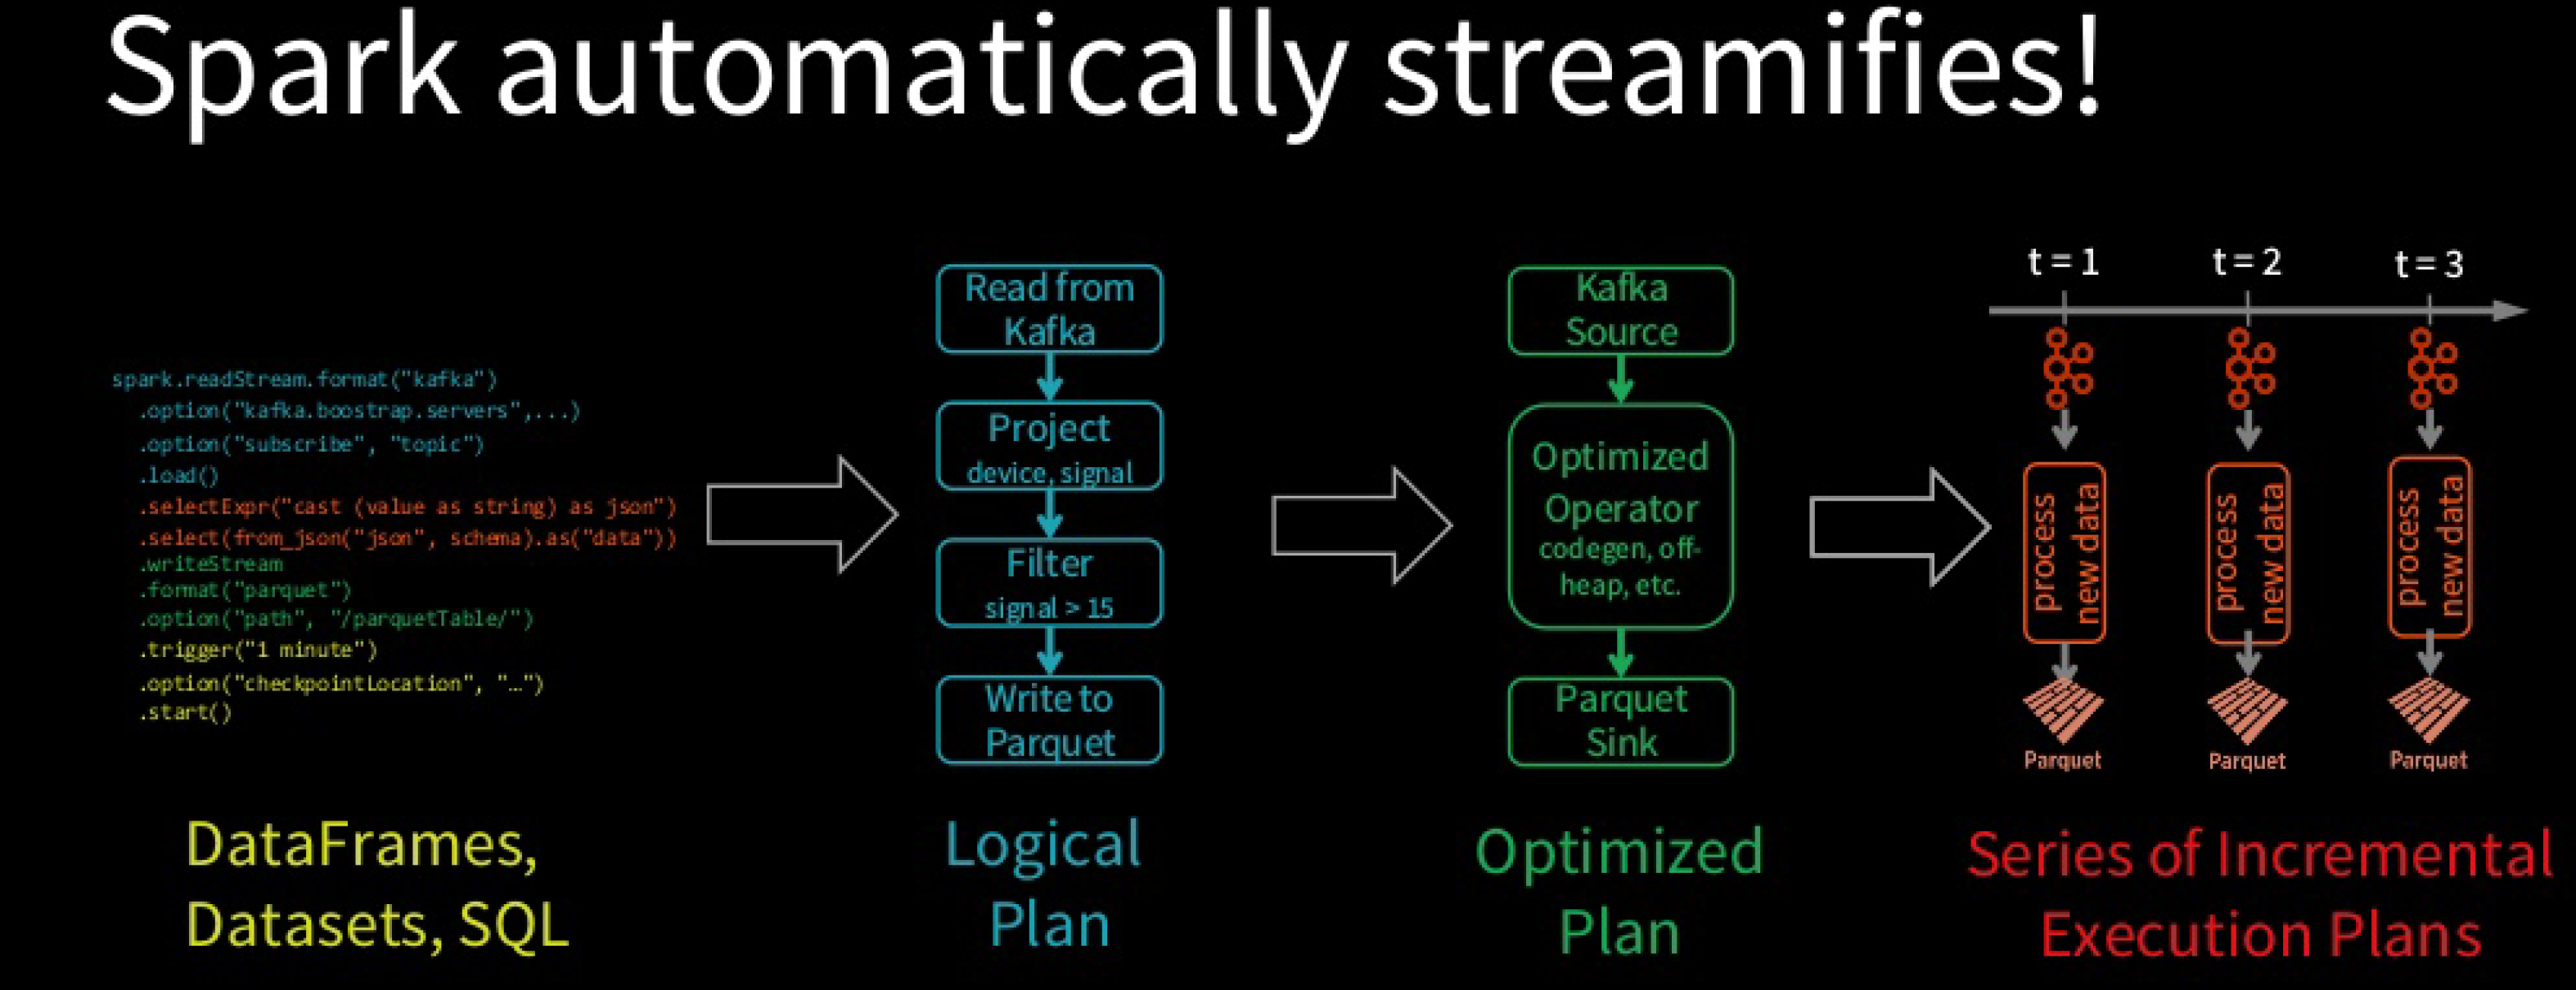 Spark stateful streaming processing is stuck in StateStoreSave stage! |  TangTalk - Tech Blog